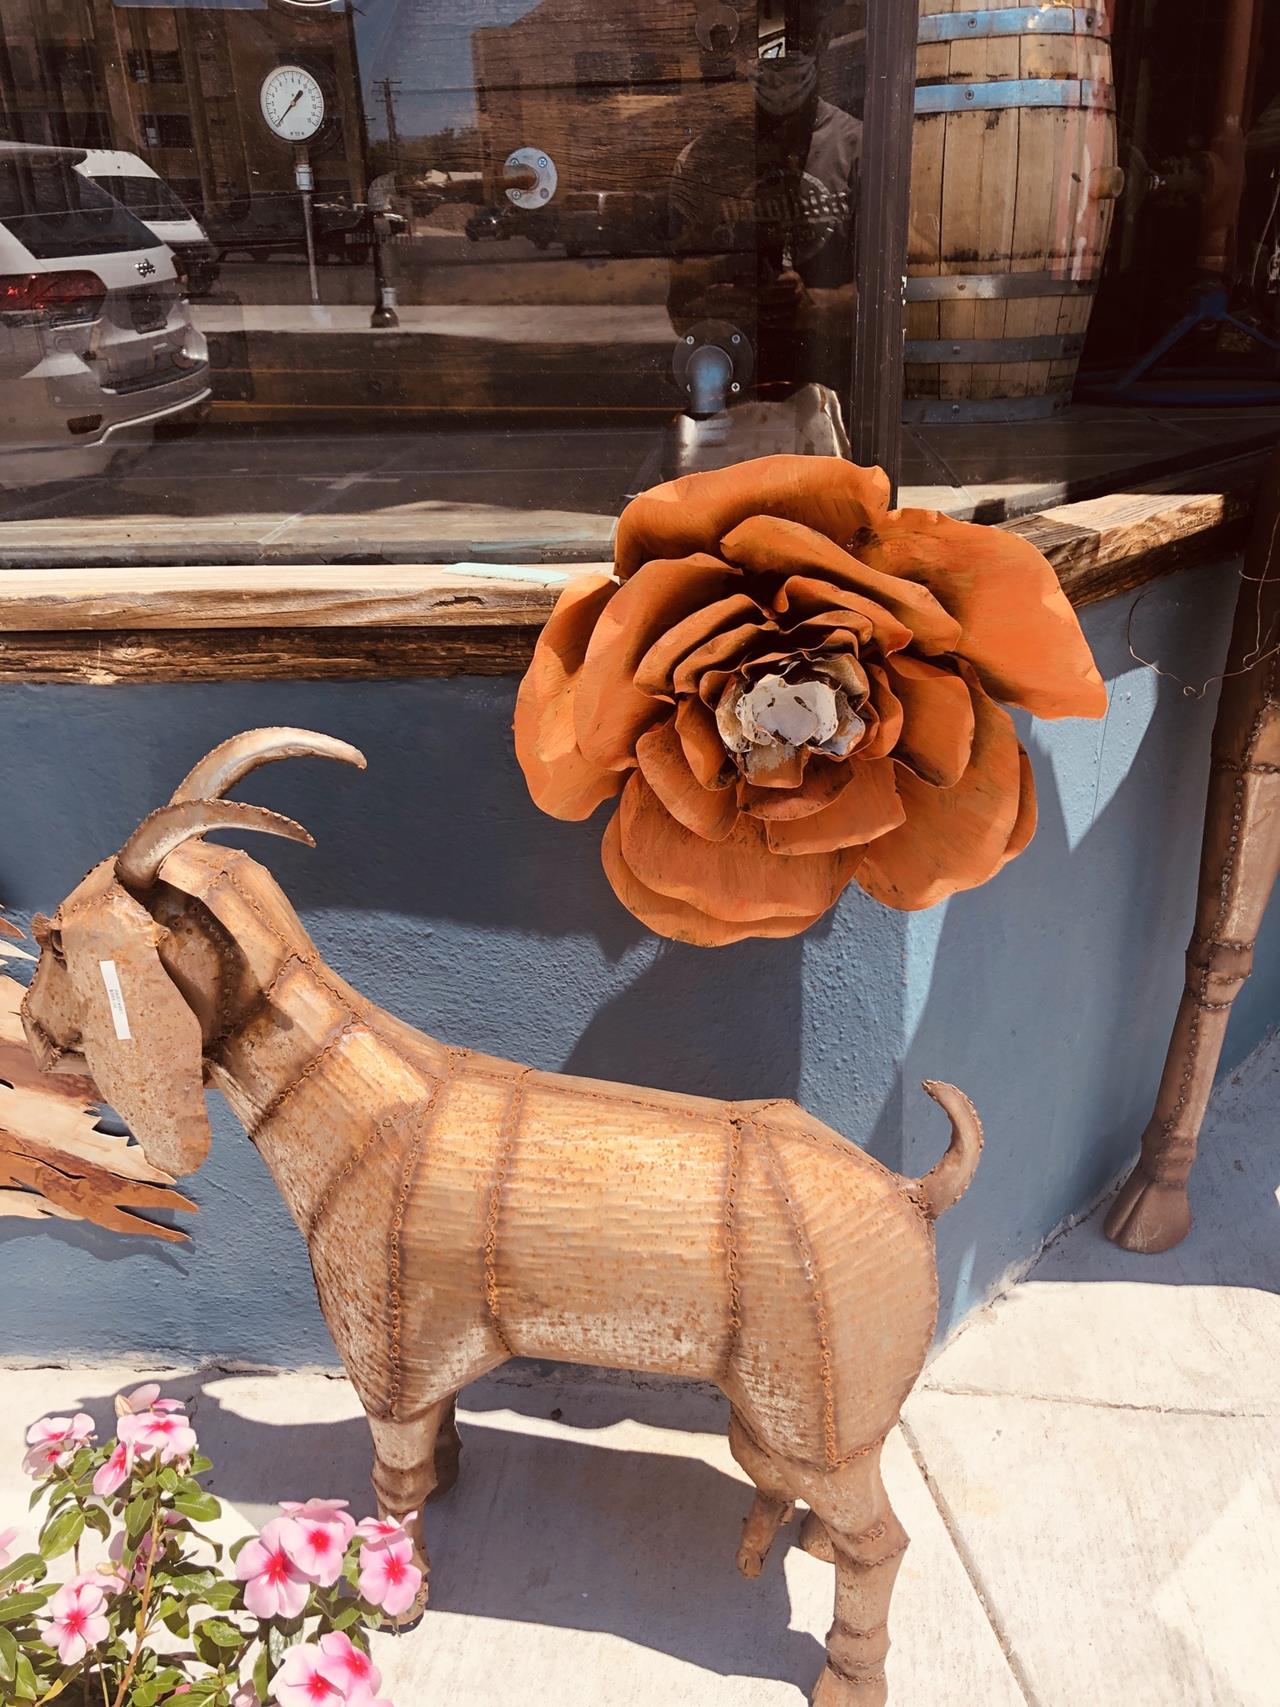 Those goats are always after your flowers . Animal art .,